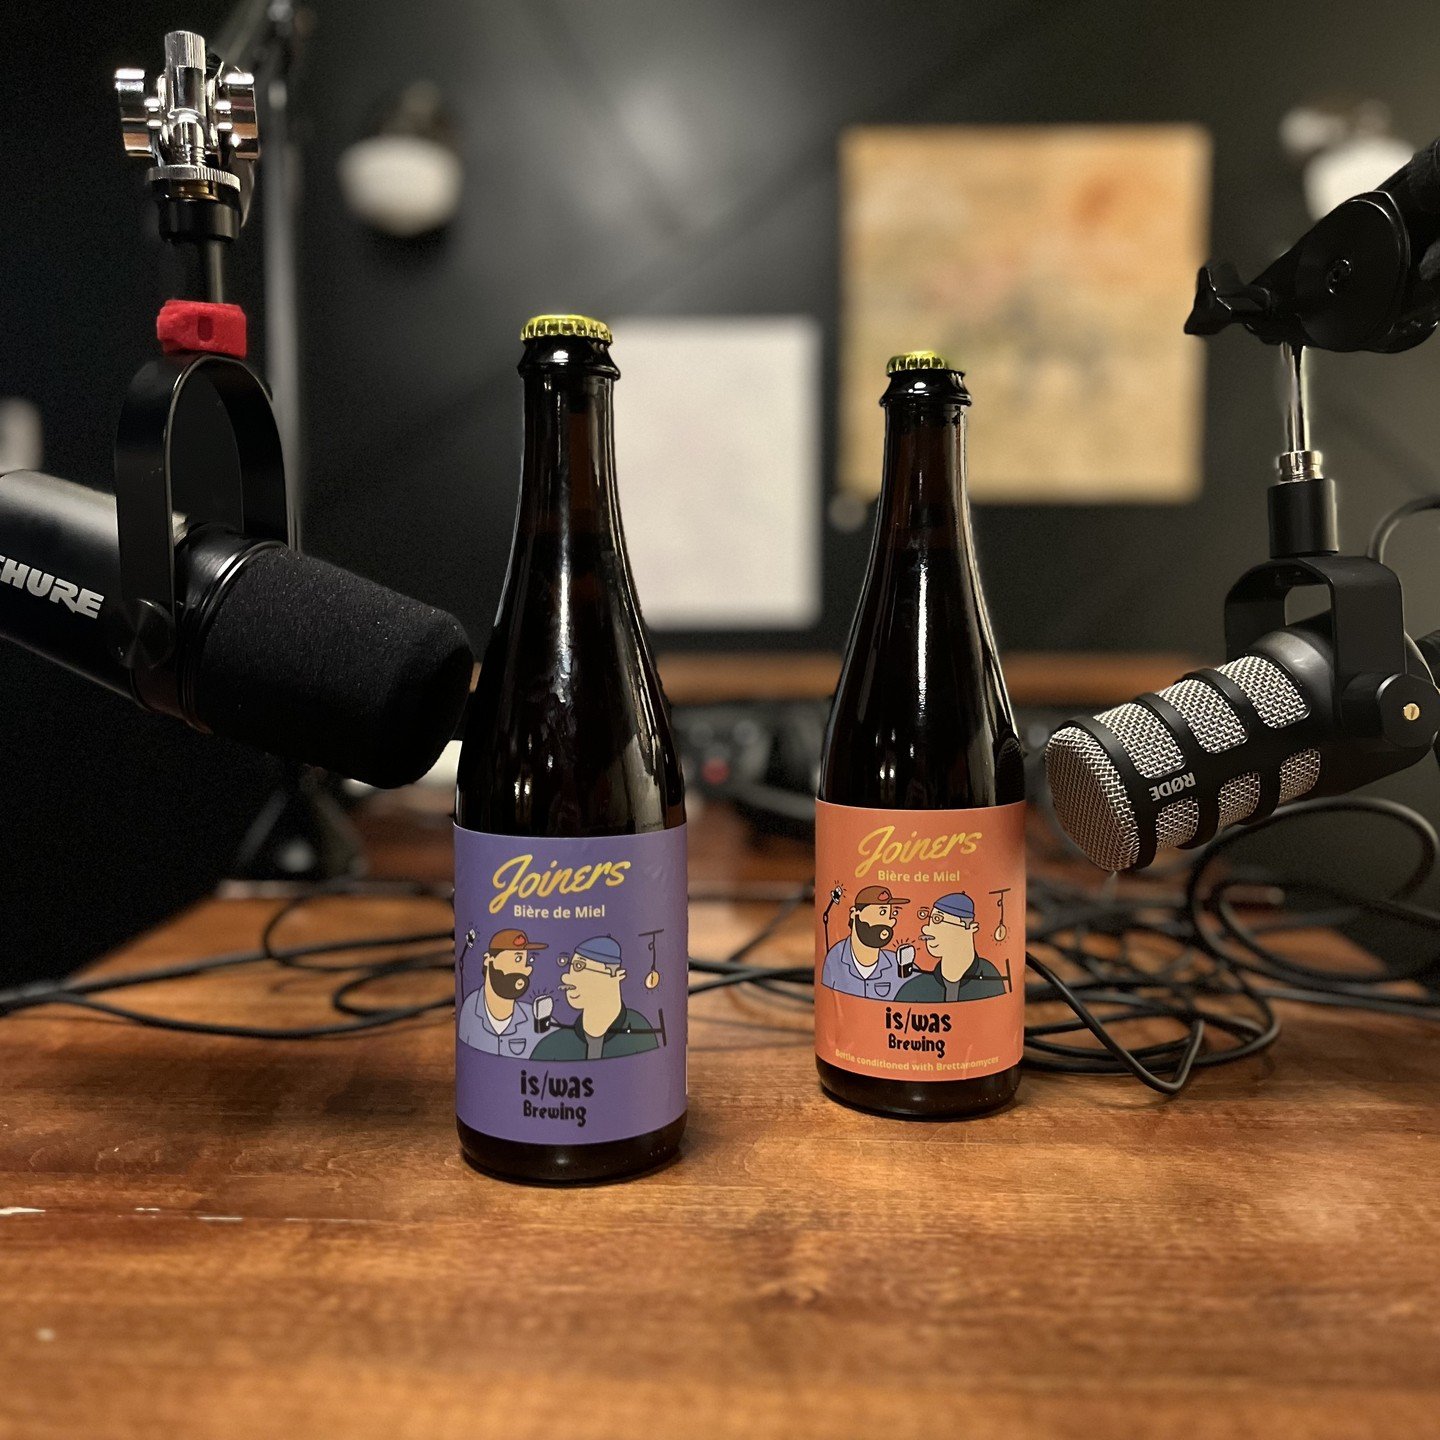 Joiners, our Biere de Miel collaboration with the eponymous podcast is available right now in our online store (link in bio) and is seeing its way into local distribution.⁣ Follow our stories to see where you can get your bottles.
⁣
@joinerspod is a 